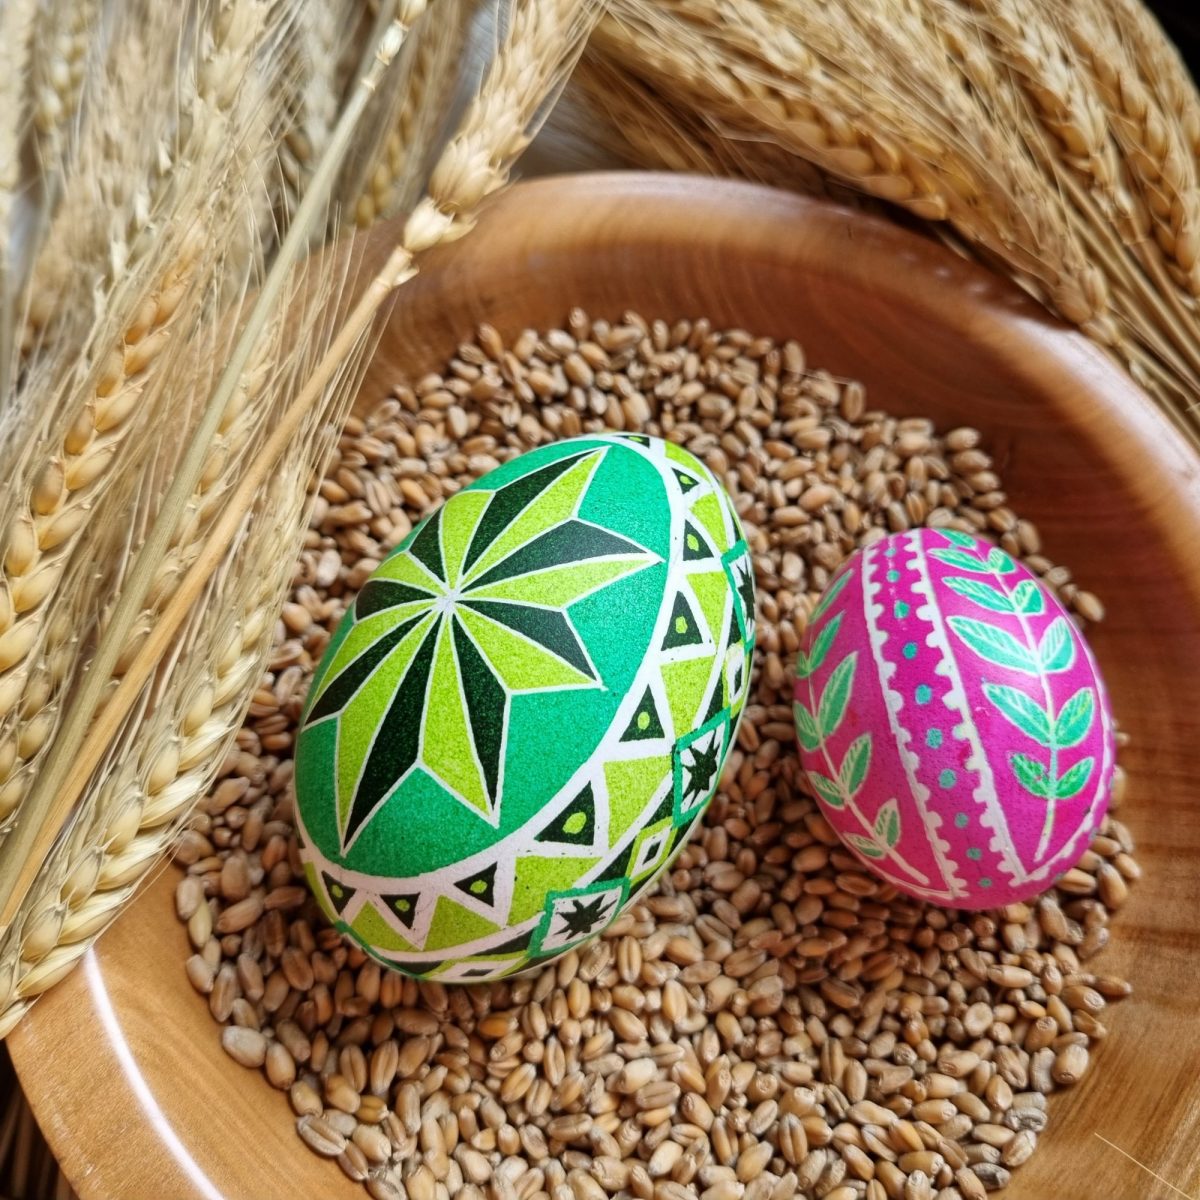 Two Pysanky-painted eggs in a grain-filled wooden bowl